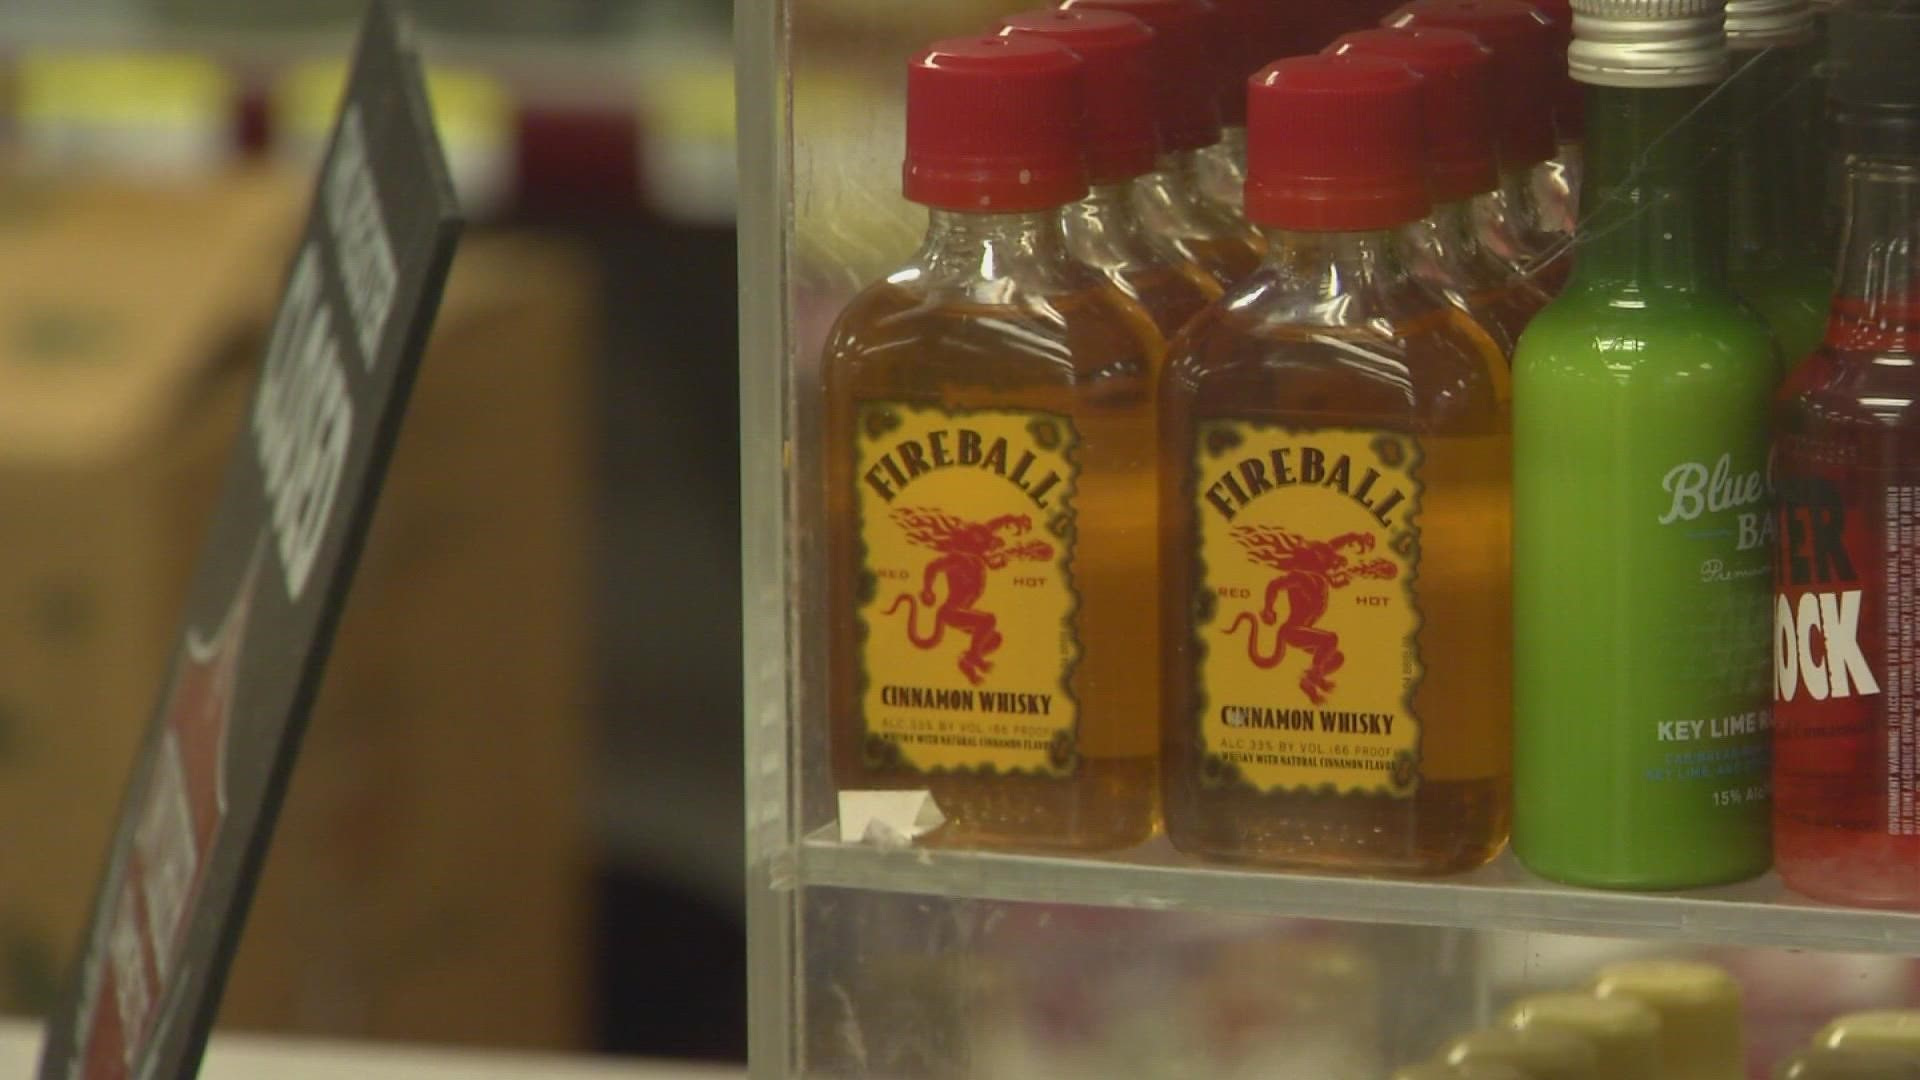 Sazerac, which makes Fireball in Lewiston, is being sued for $5 million. A customer alleges it can be misleading to buy the malt-flavored Fireball Cinnamon.